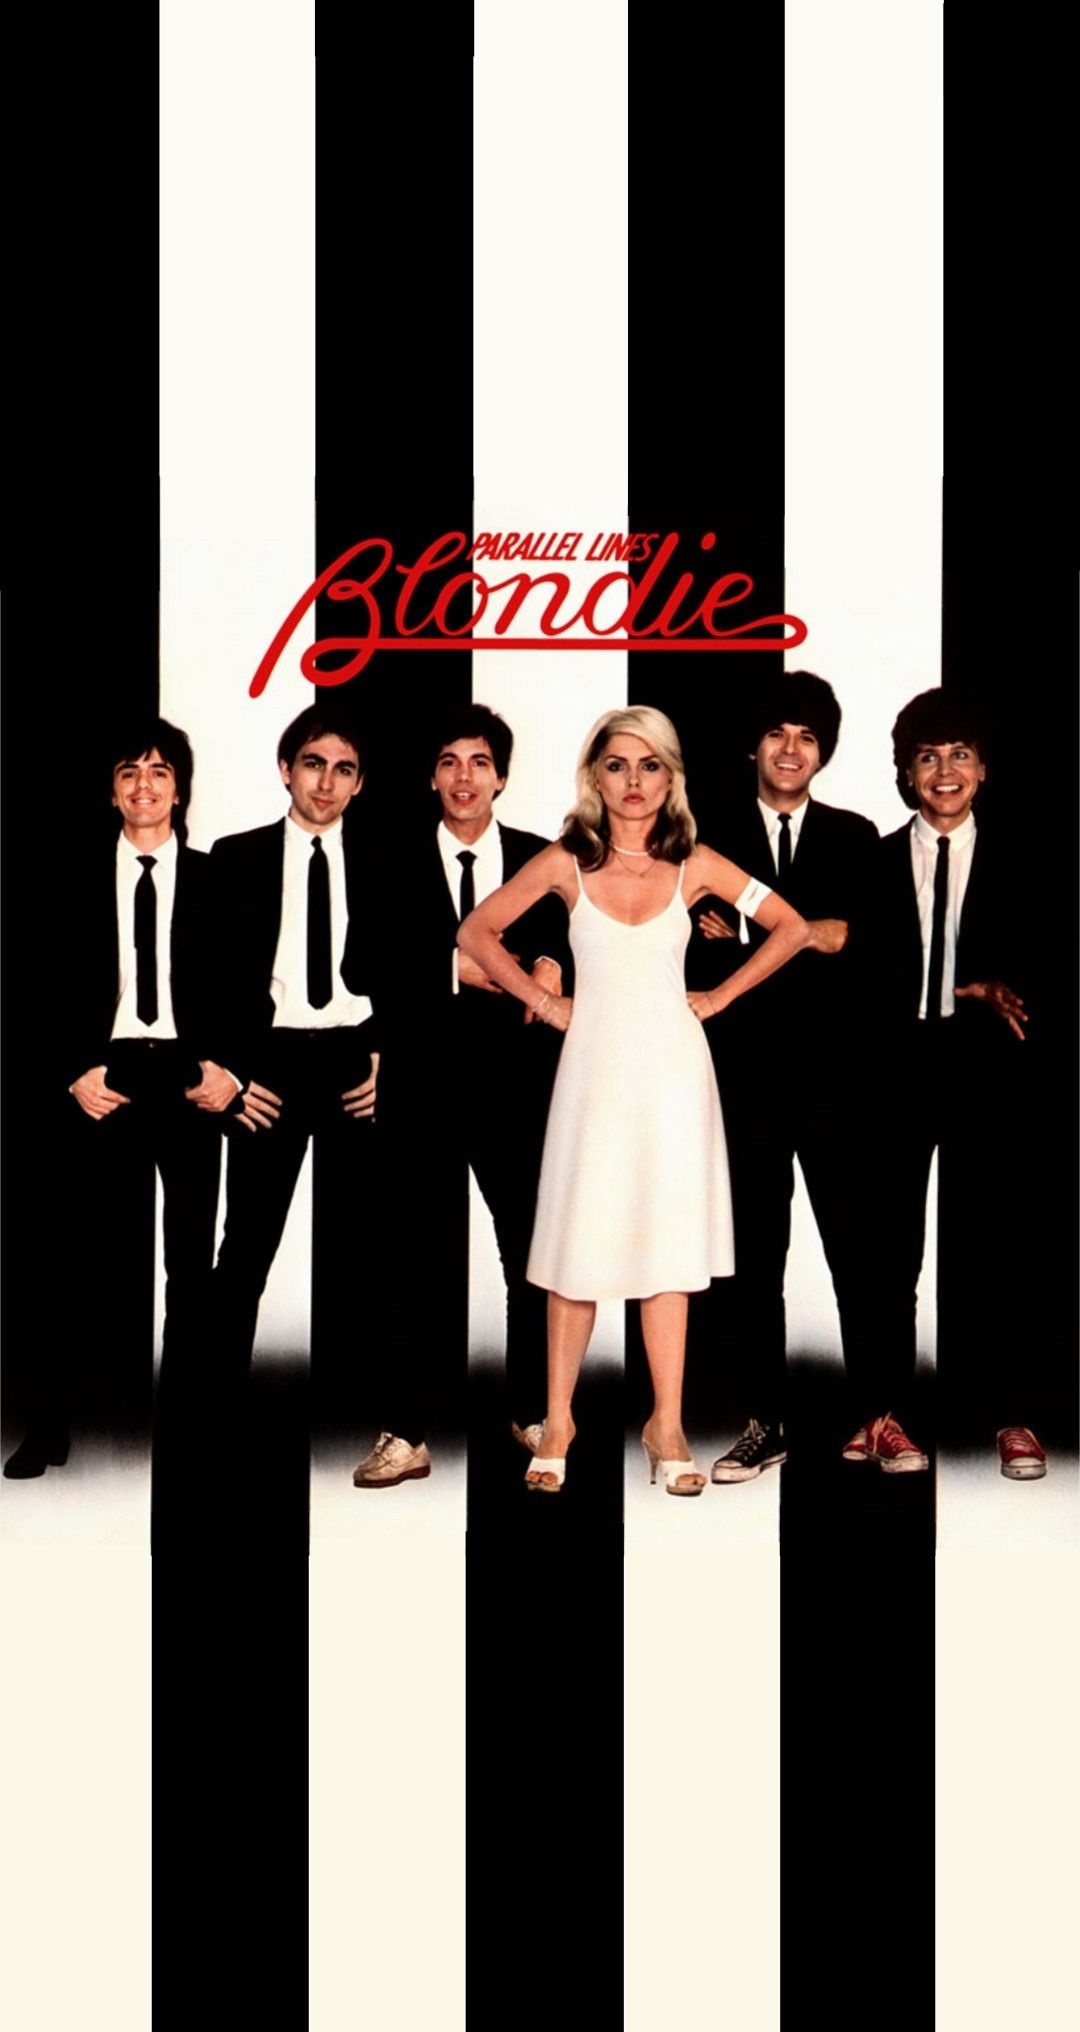 Blondie band, Parallel Lines album, Vintage music posters, Band photoshoot, 1080x2040 HD Handy